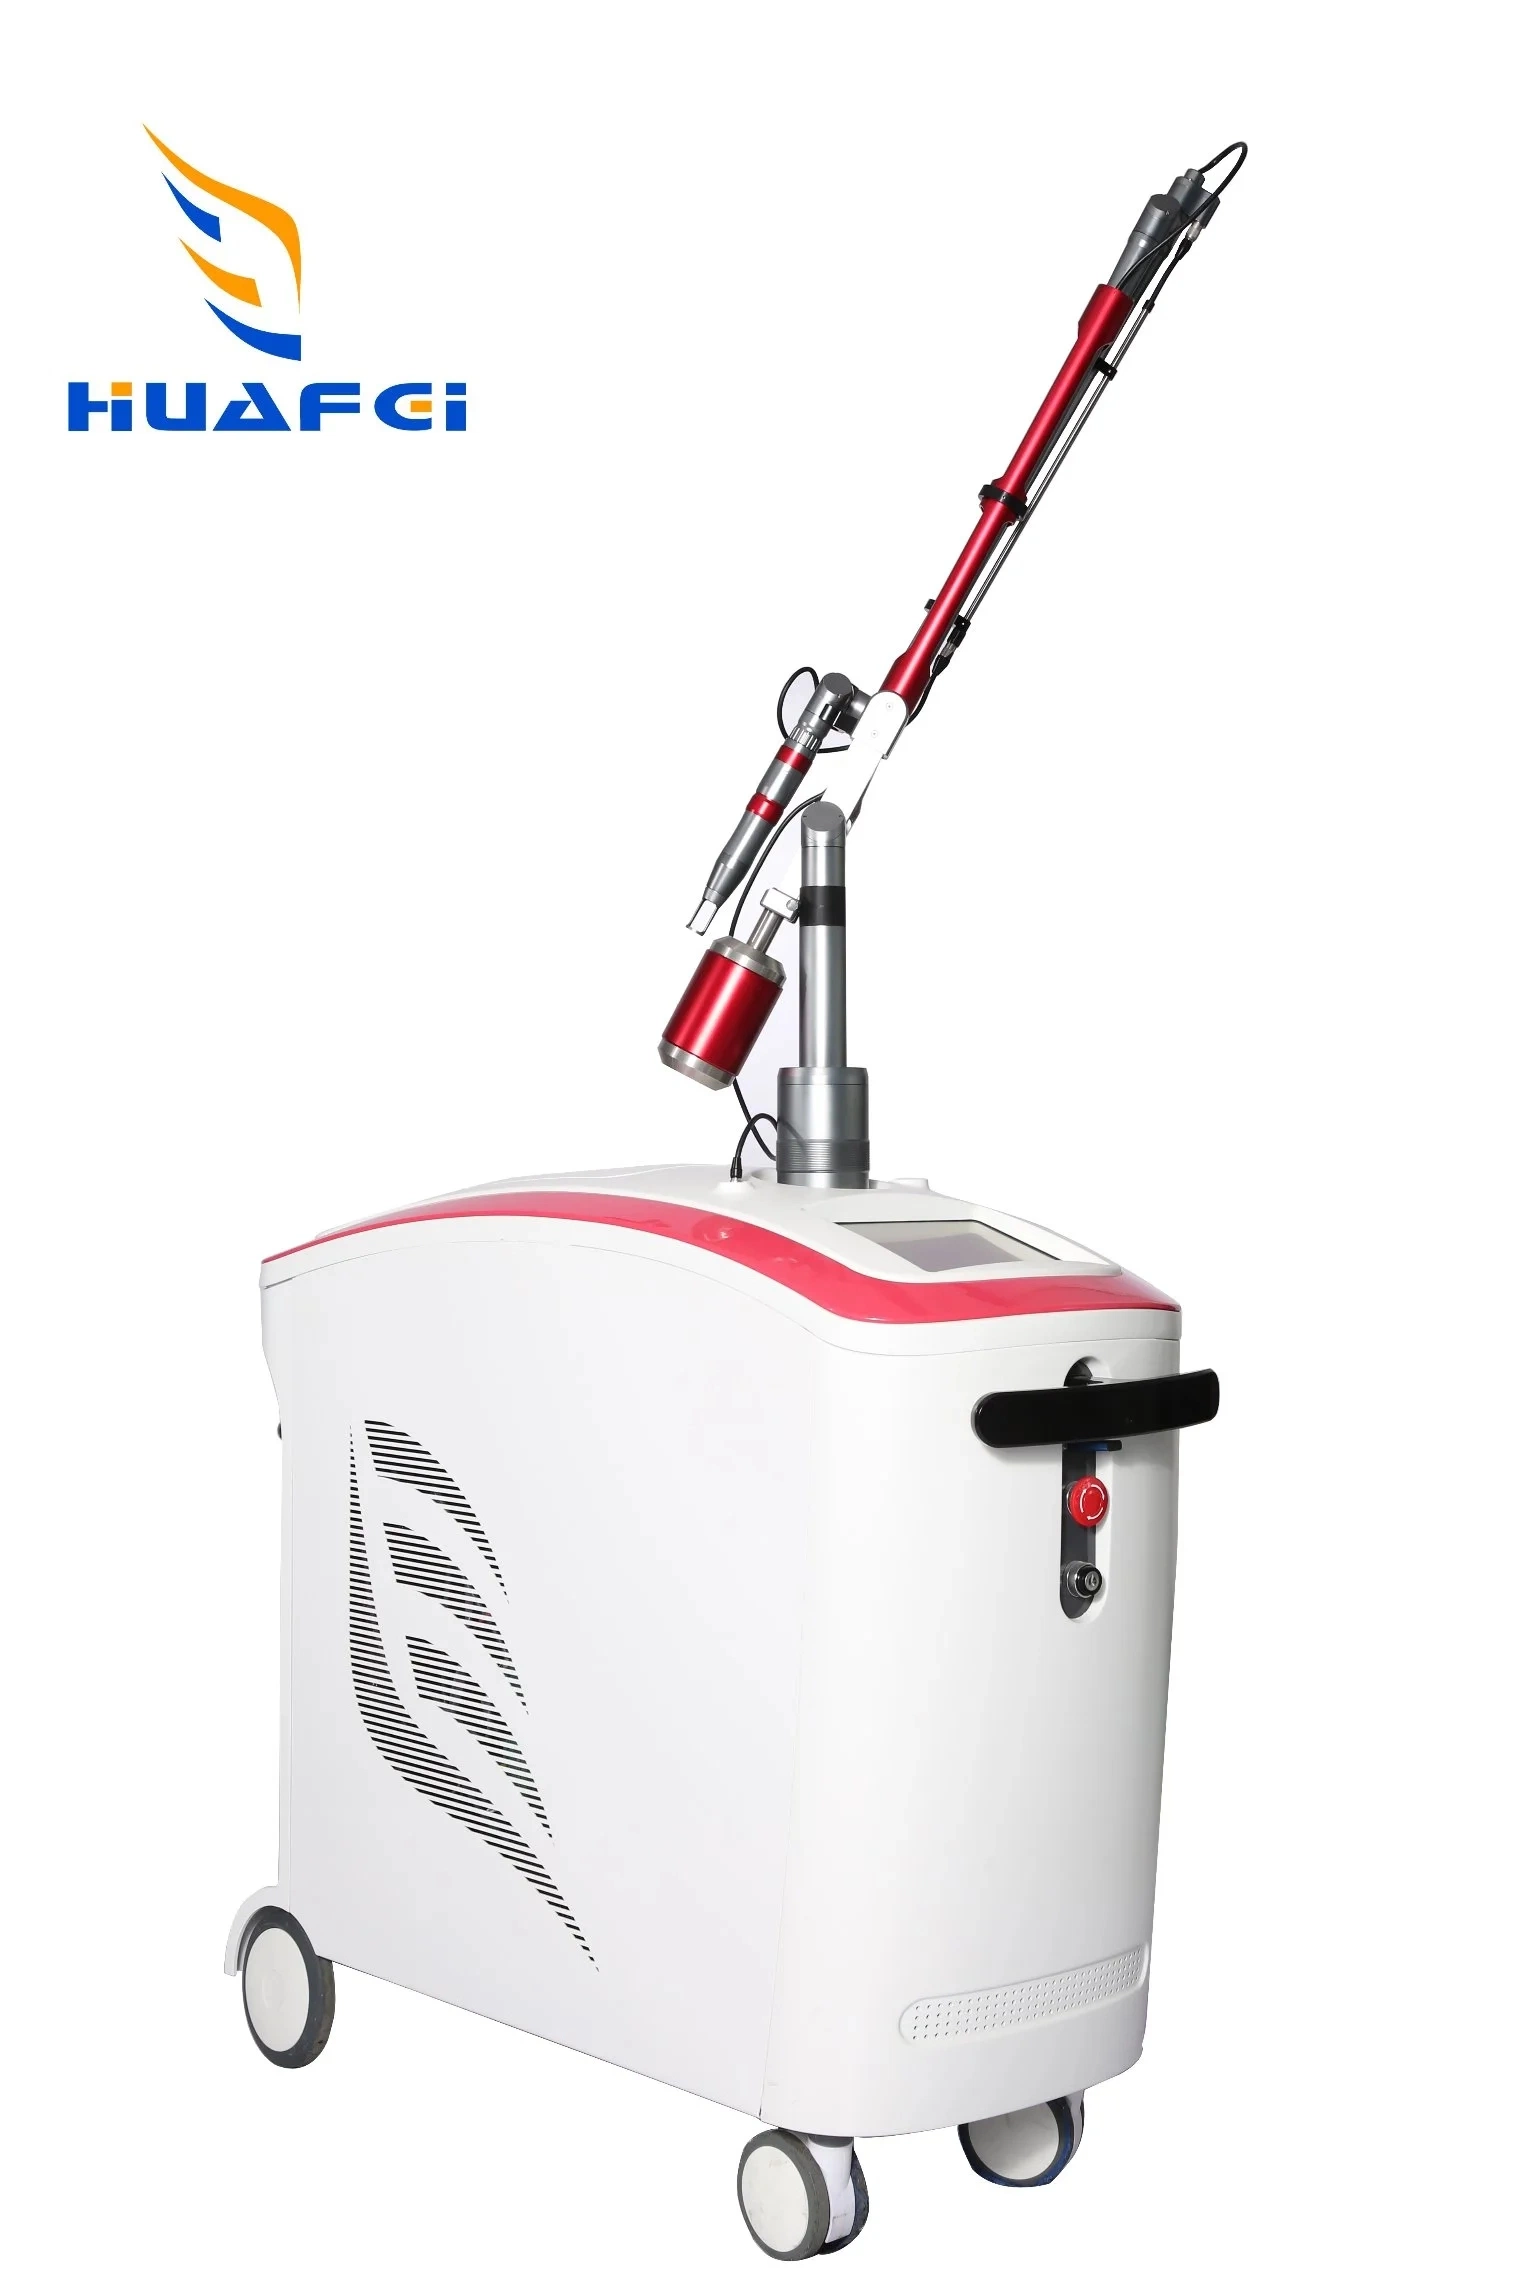 Pico Second Laser/Picosecond Laser ND YAG Q Switched Tattoo Removal Laser Beauty Machine